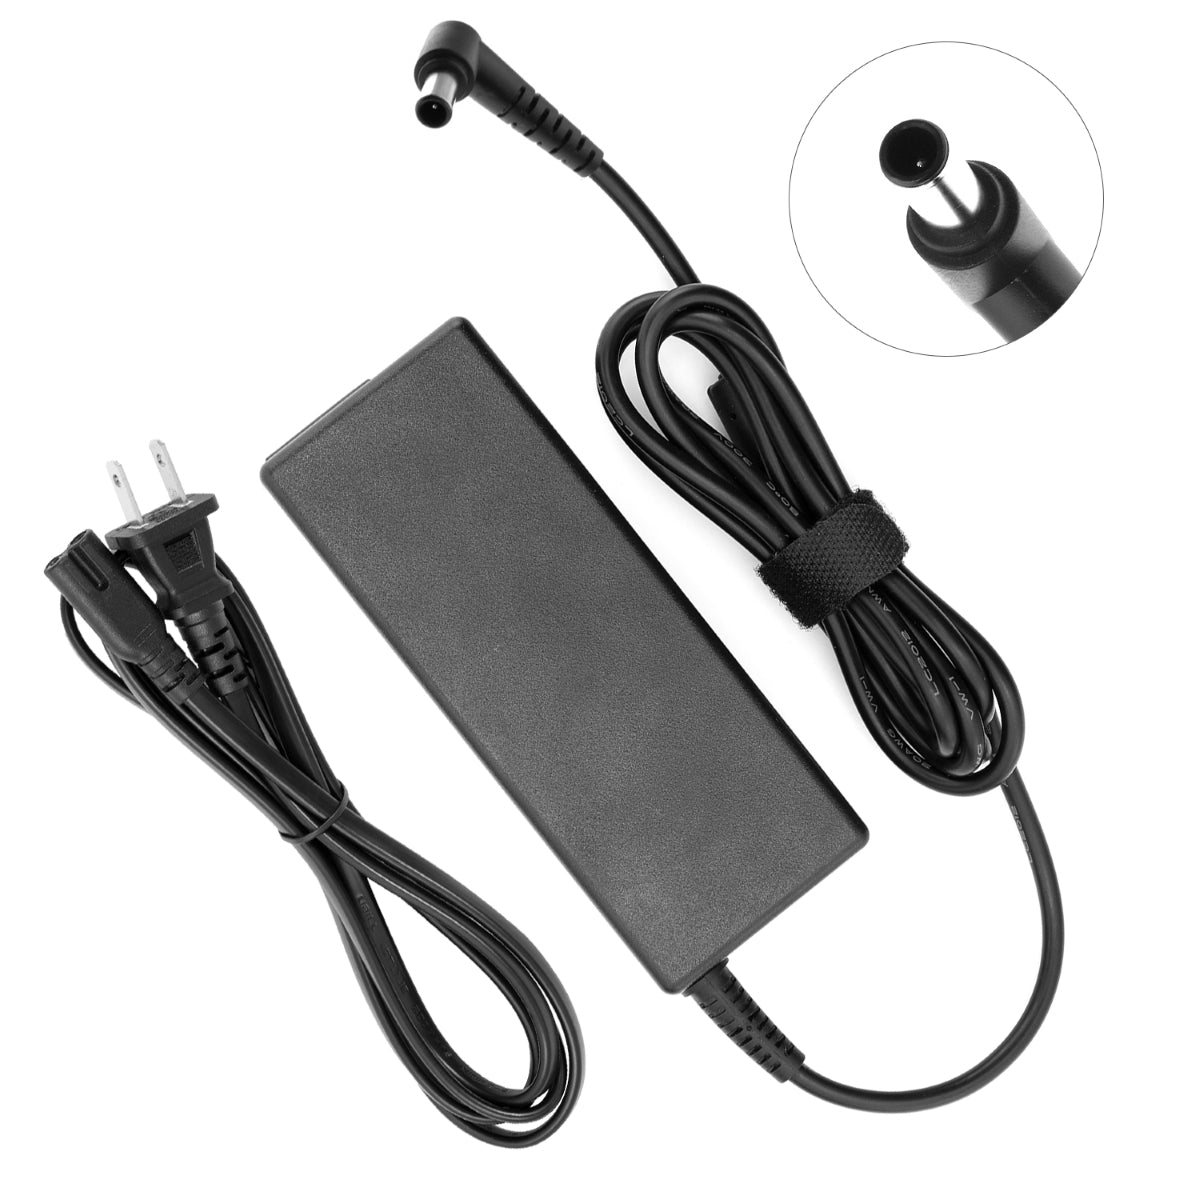 Compatible Charger for Sony Vaio PCG-71211L